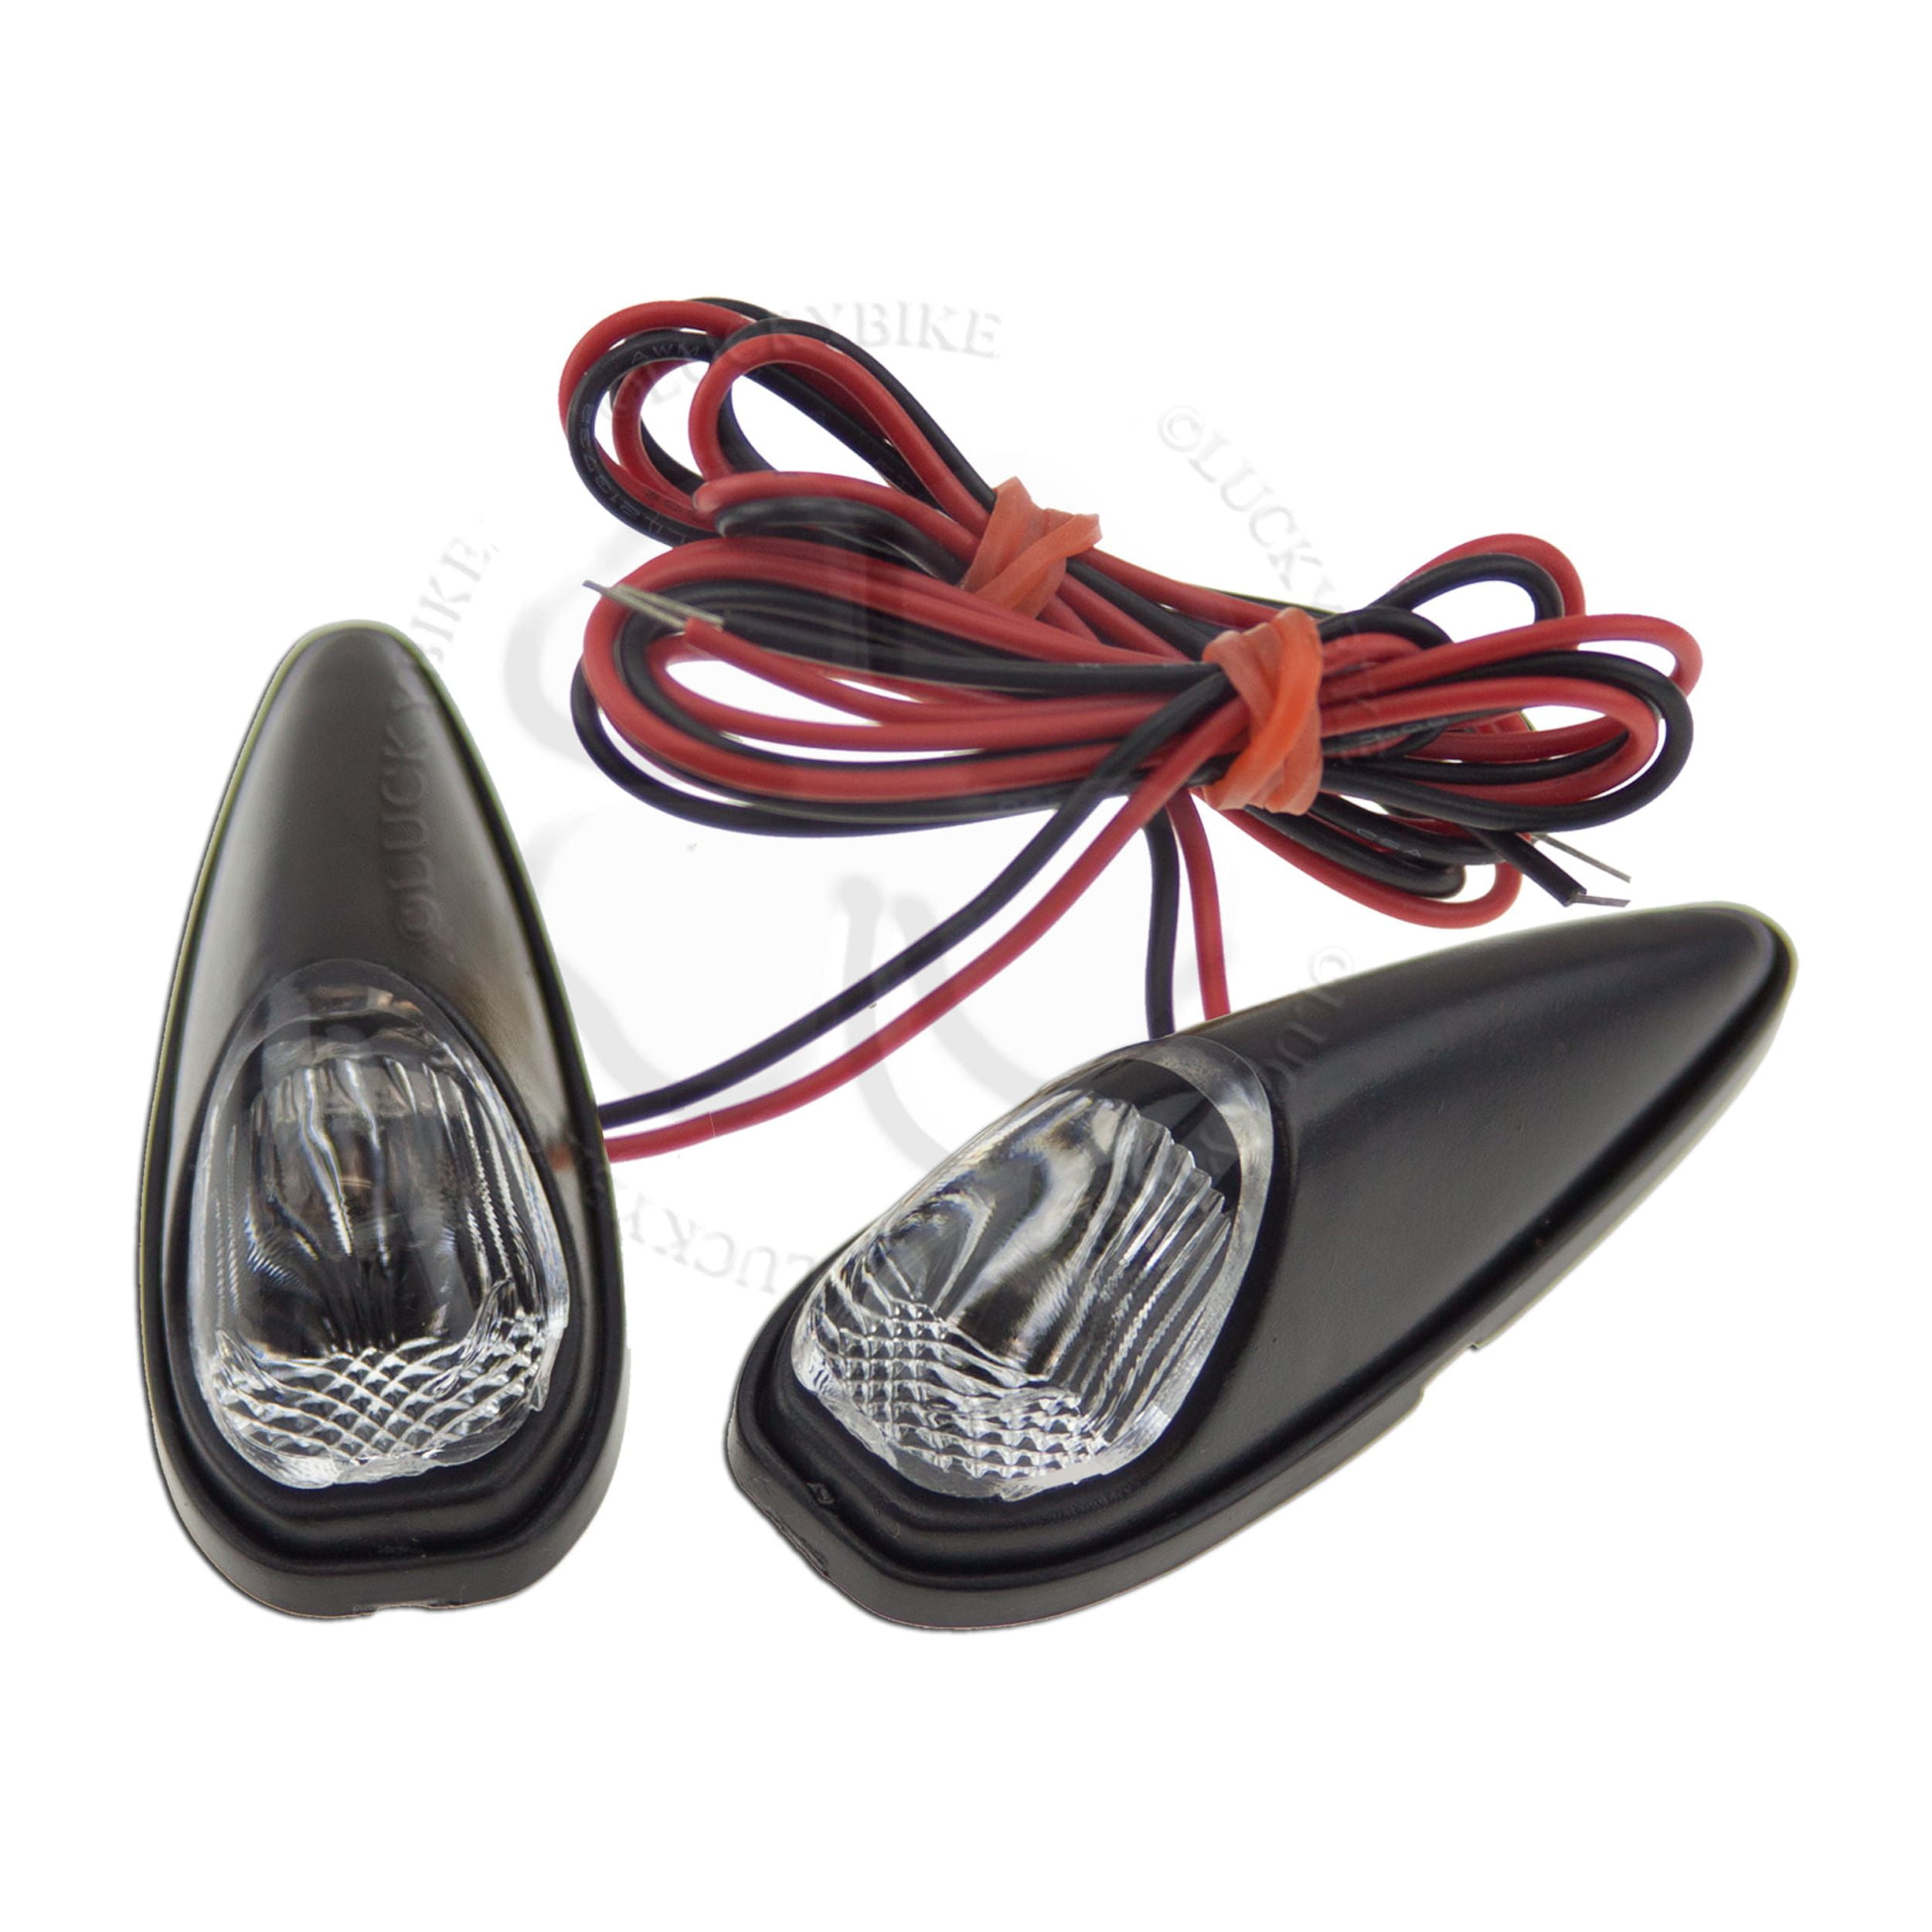 LED Lights Safety Motorcycle